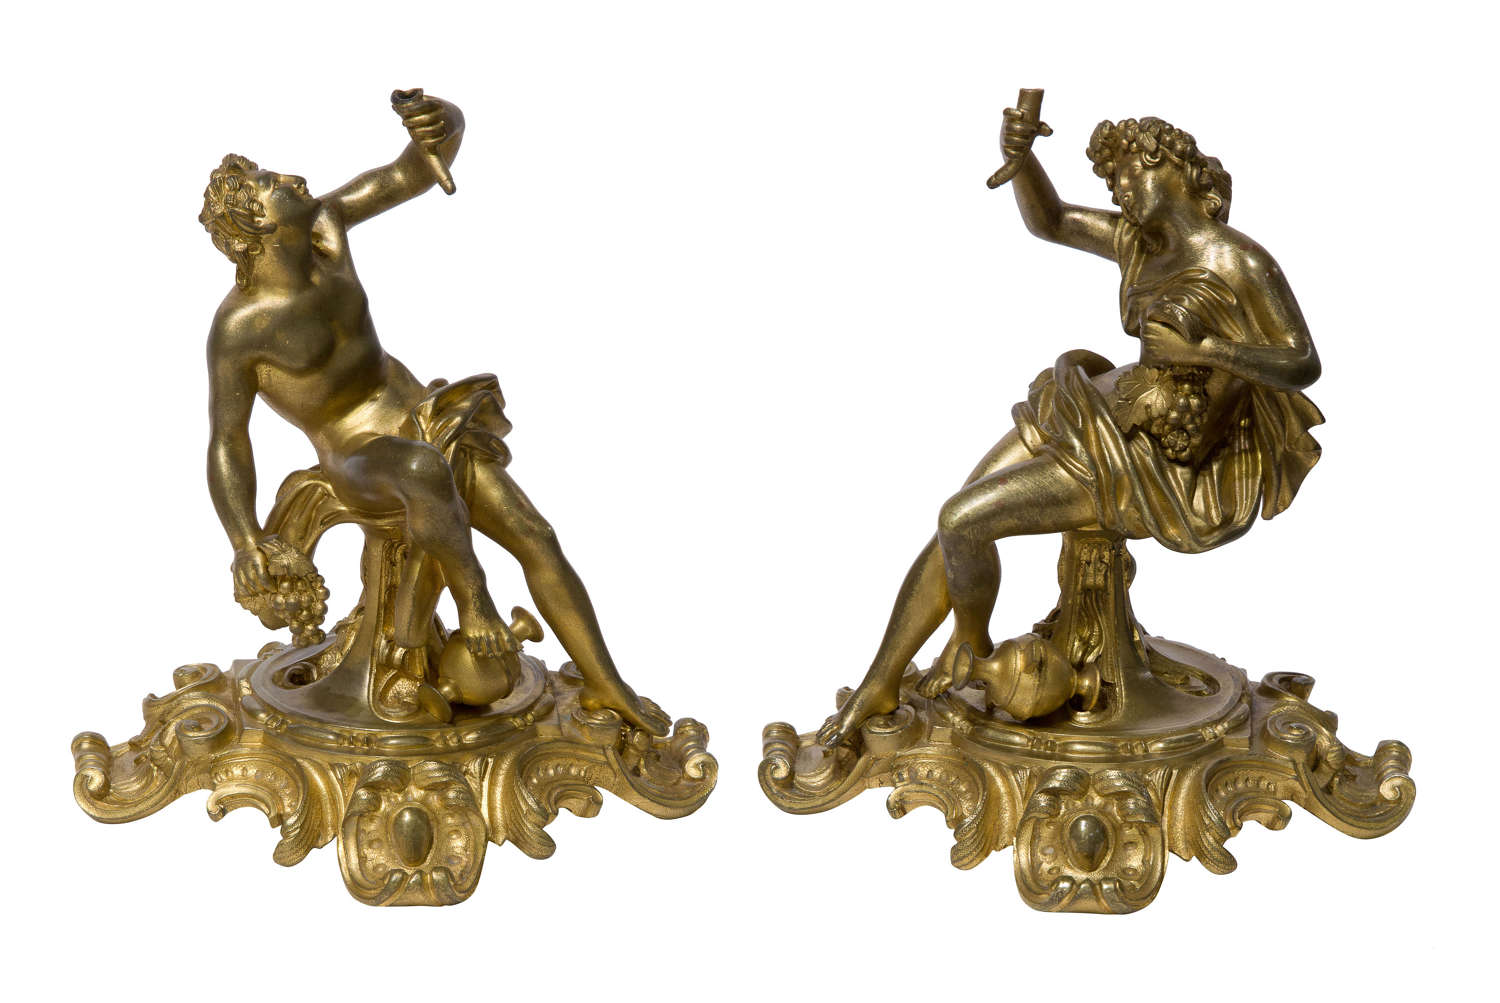 A pair of early 19thCentury gilt bronze figures